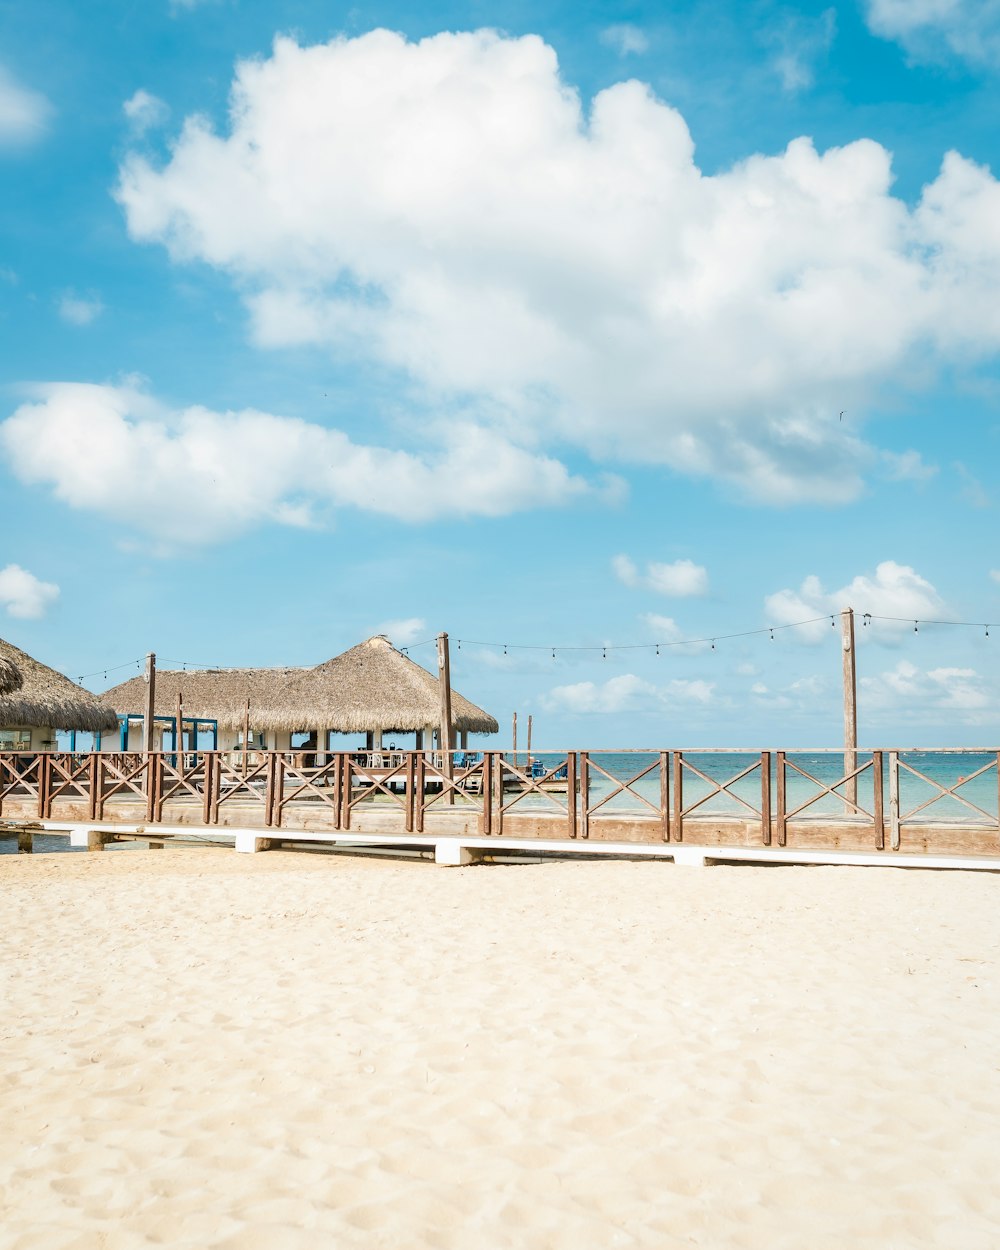 a sandy beach with a wooden fence and thatched umbrellas